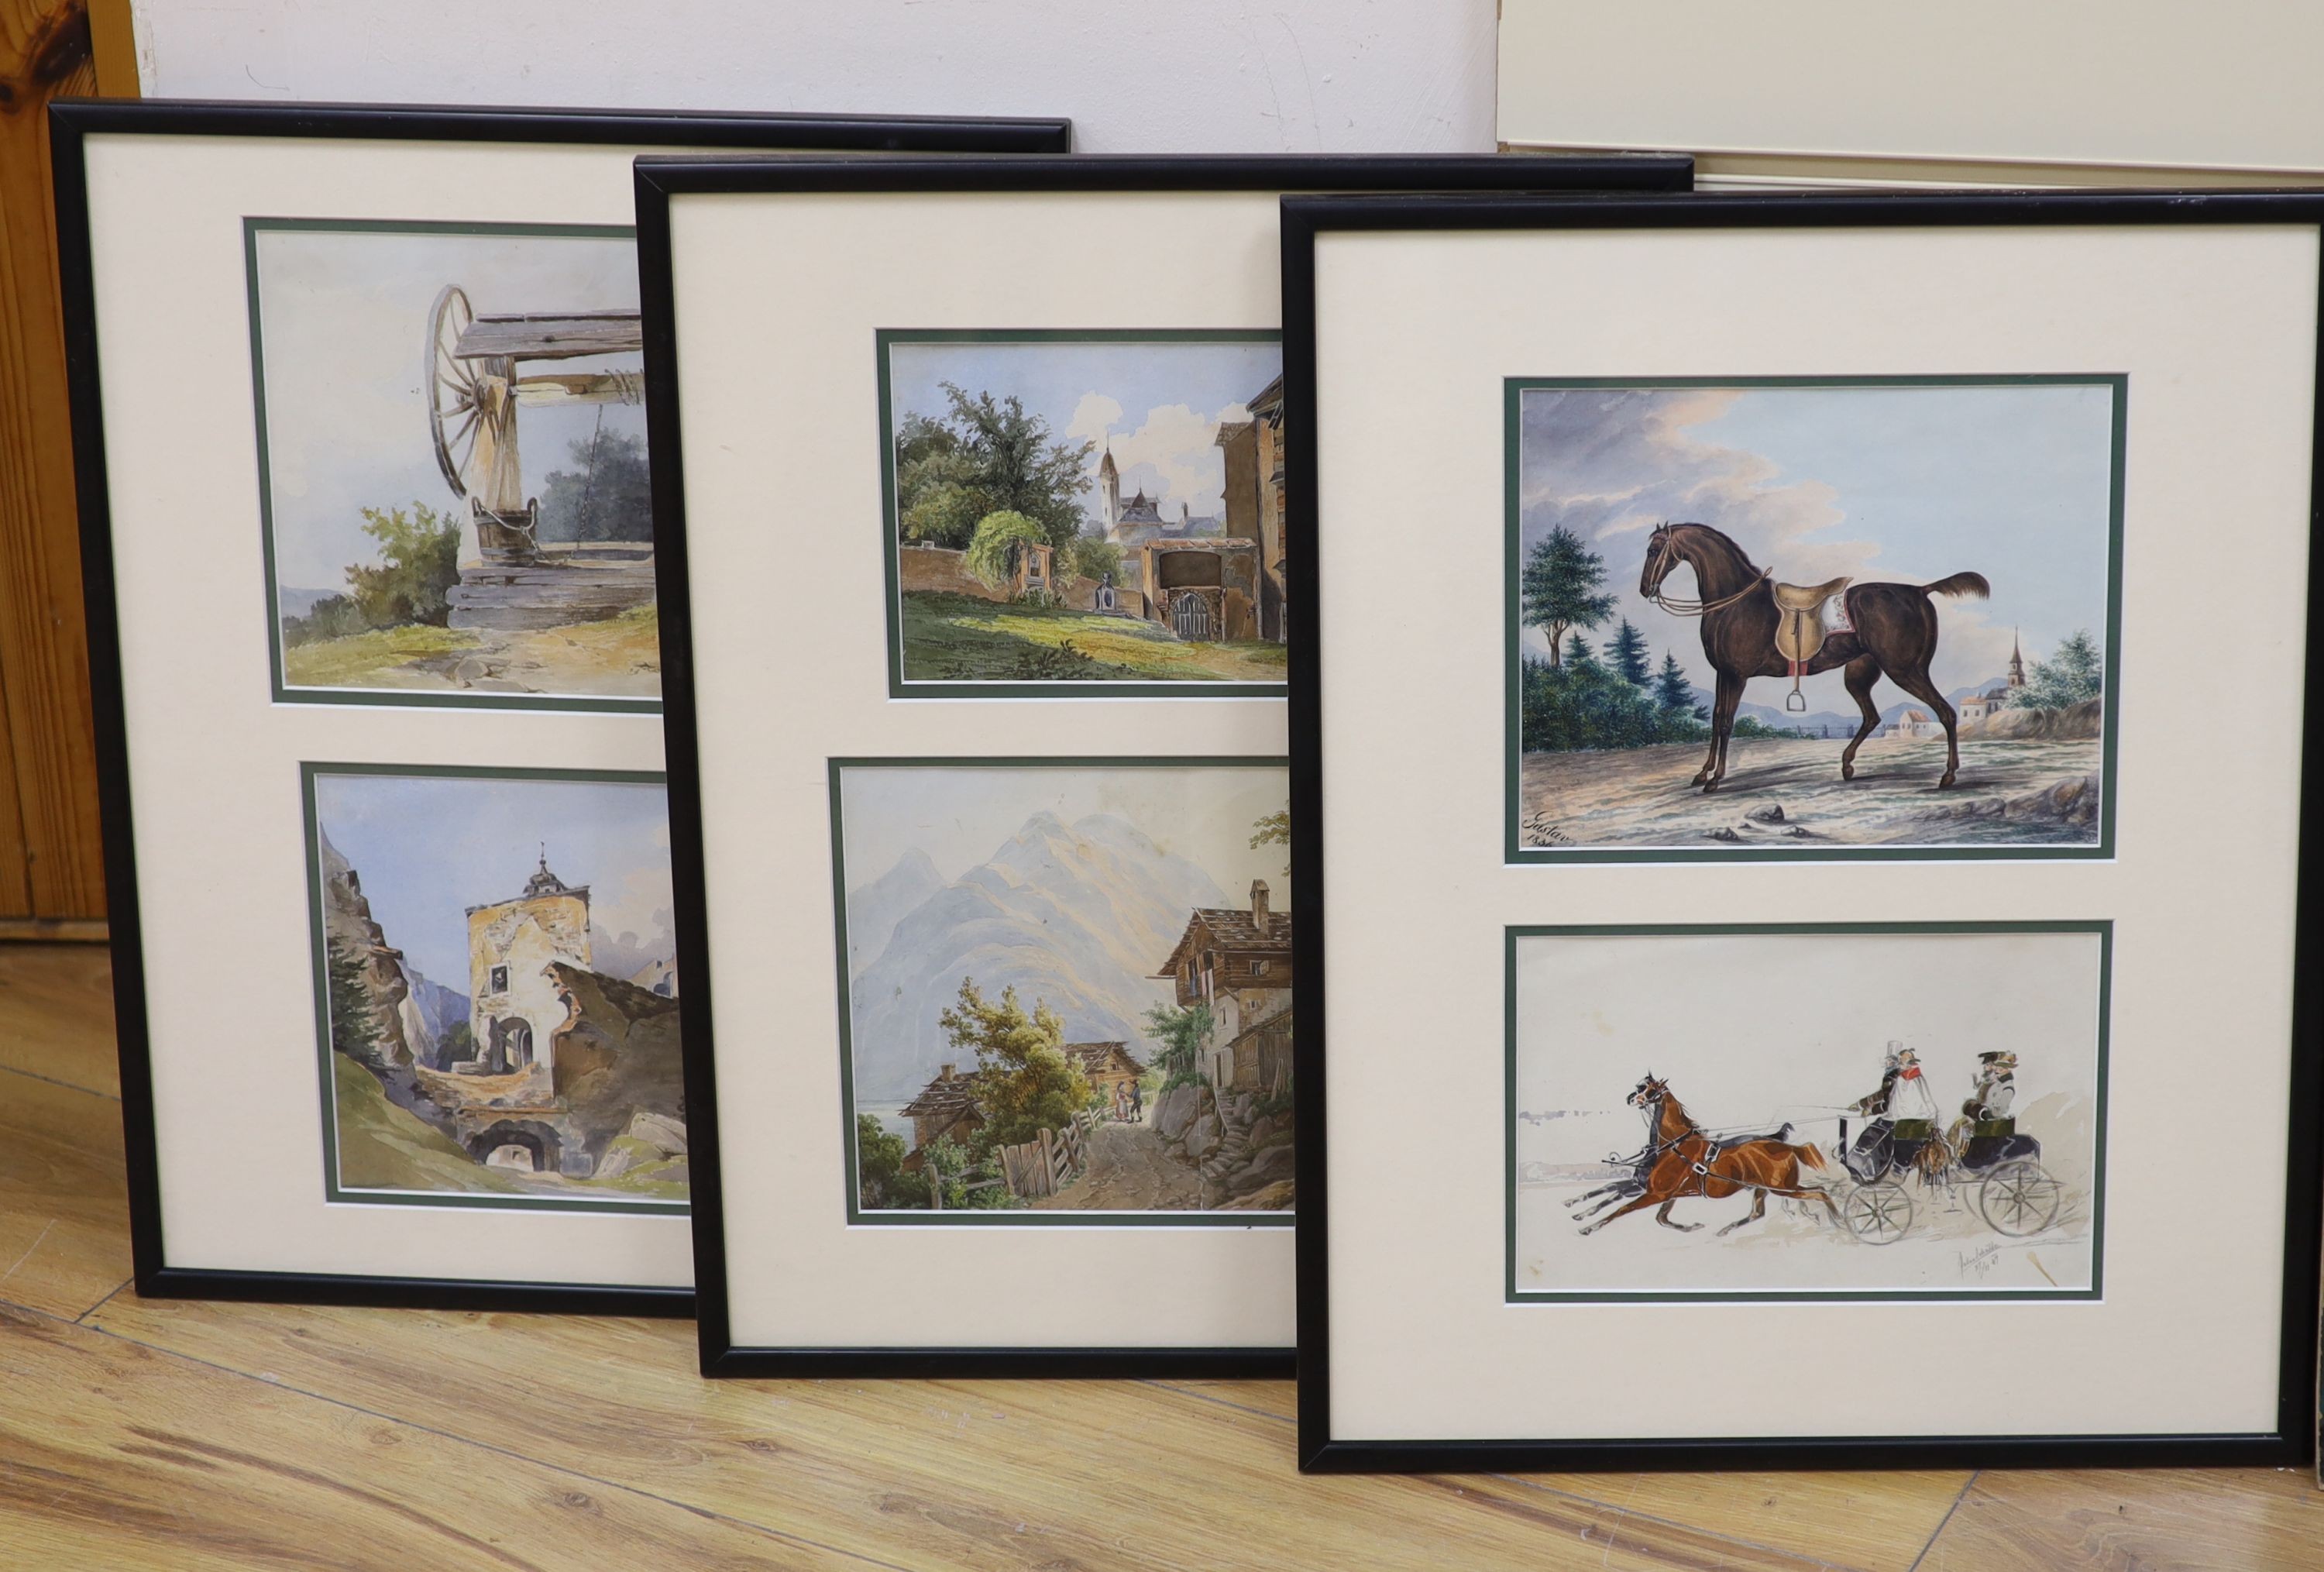 19th century German School, six watercolours, Studies of a horse and cart, a saddled horse and Alpine scenes, one signed Jules Schaffer 1847, the horse signed Gustav 1836, largest 19 x 26cm, in three frames